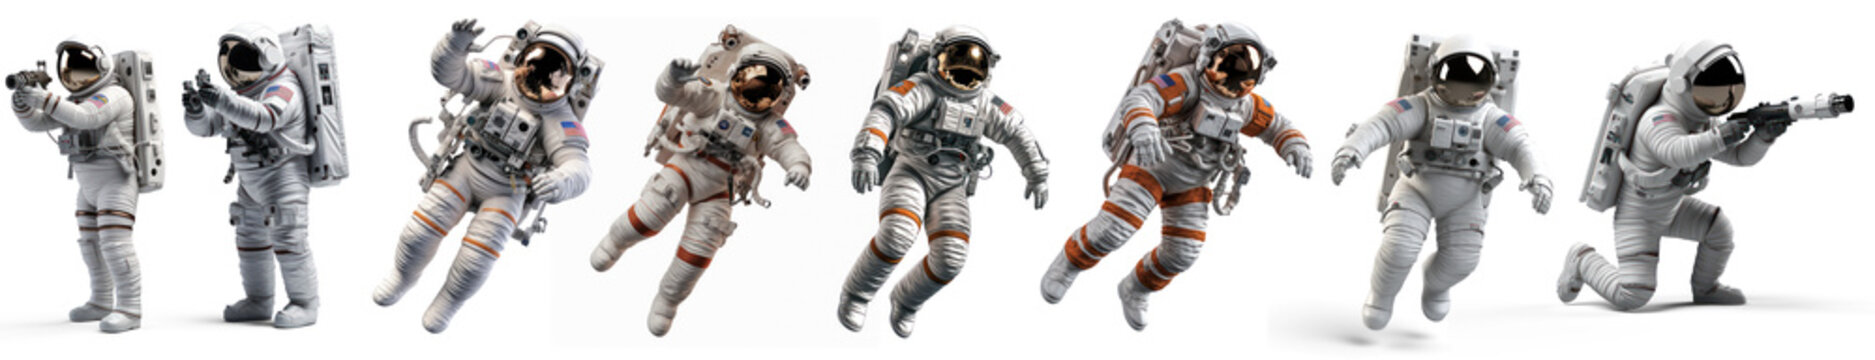 Astronauts standing with helmets set isolated happy man and woman in costumes of spacecraft crew holding hand up, astronauts characters in spacesuits greeting and walking
